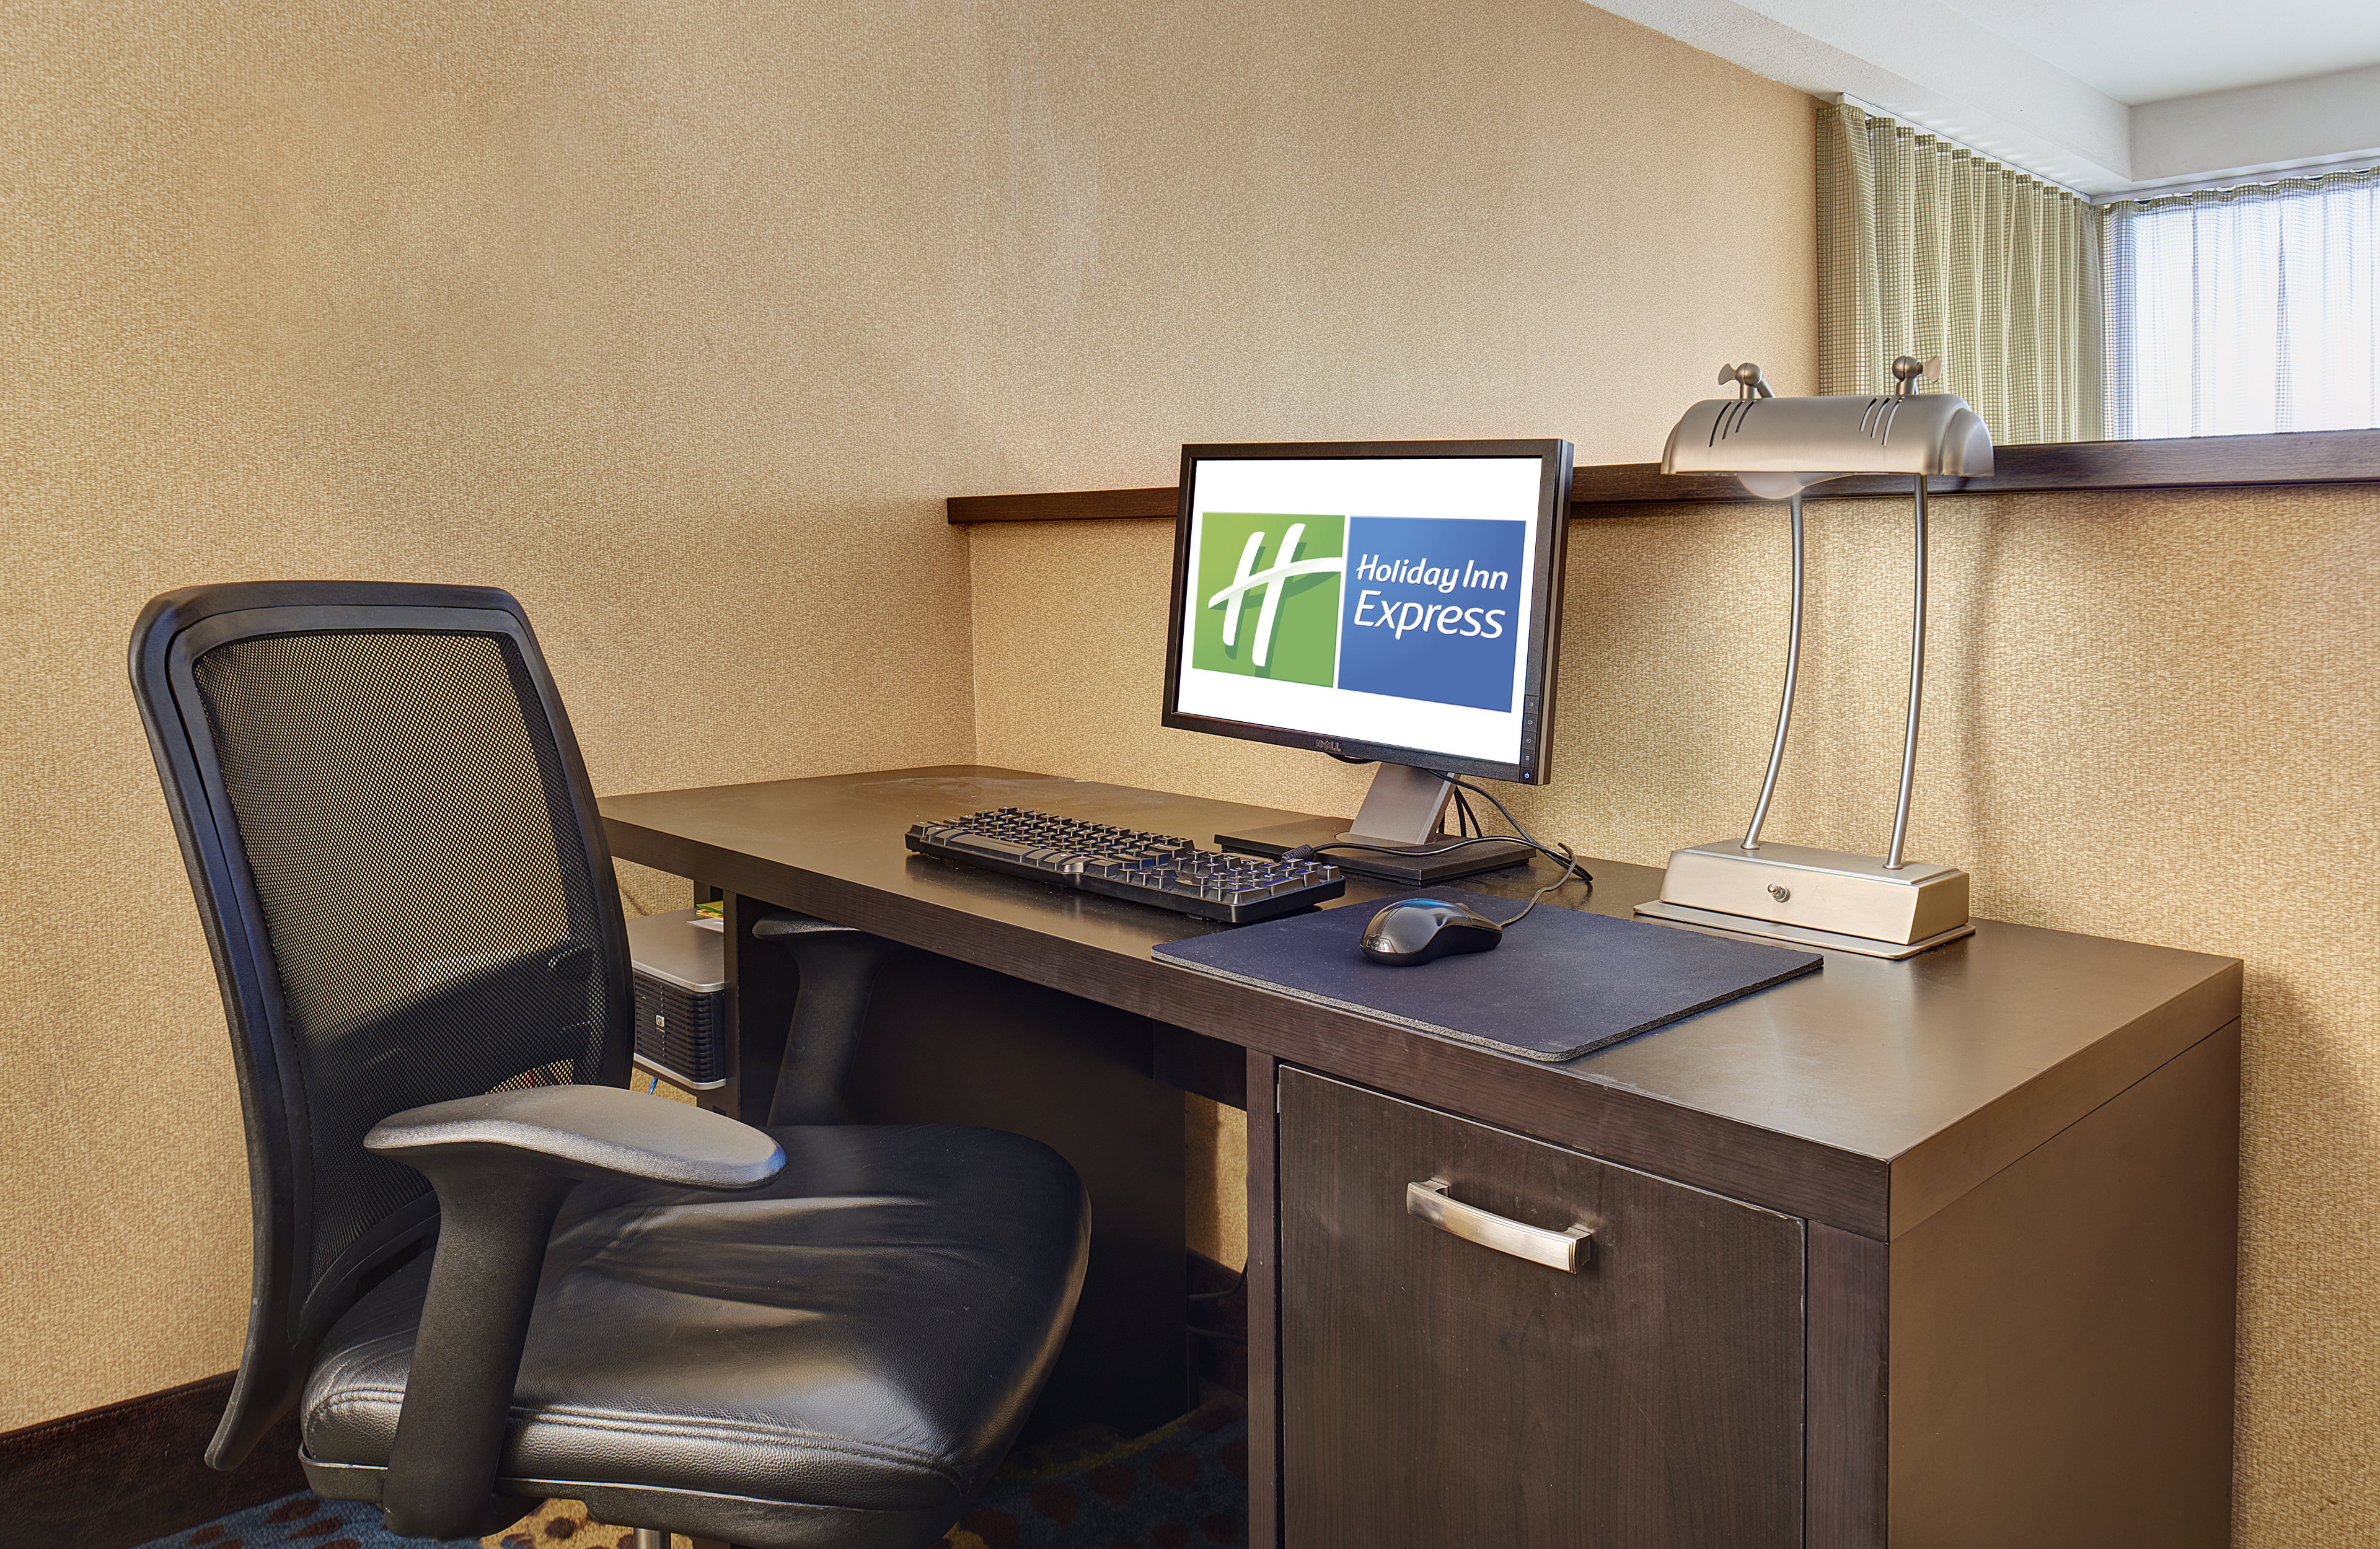 The self-service business center is always available to guests.